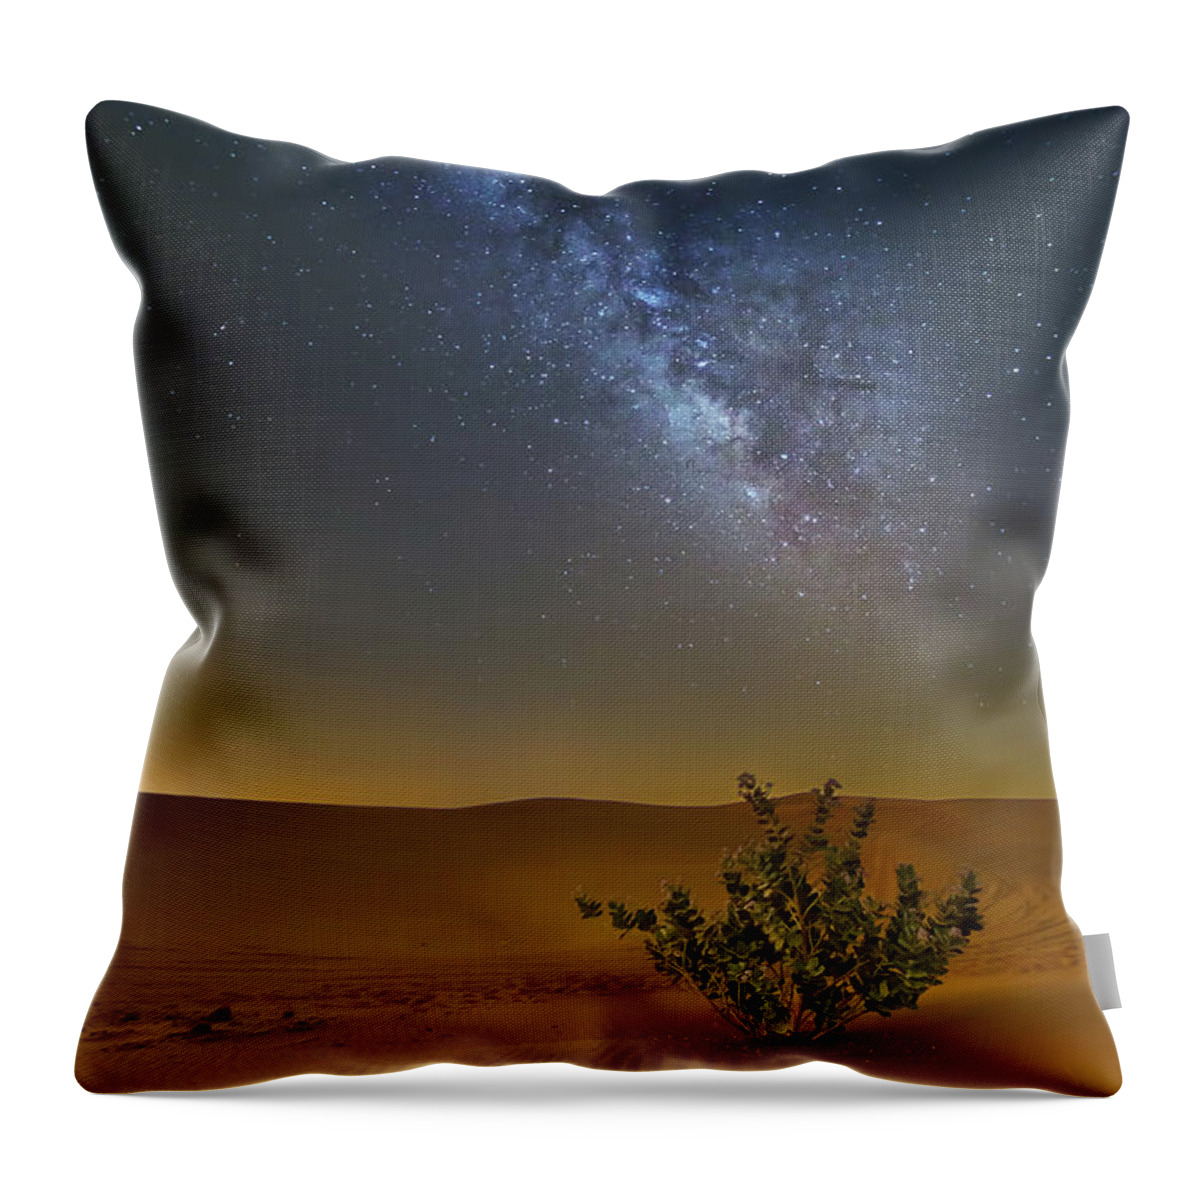 Tranquility Throw Pillow featuring the photograph Milkyway by Enyo Manzano Photography